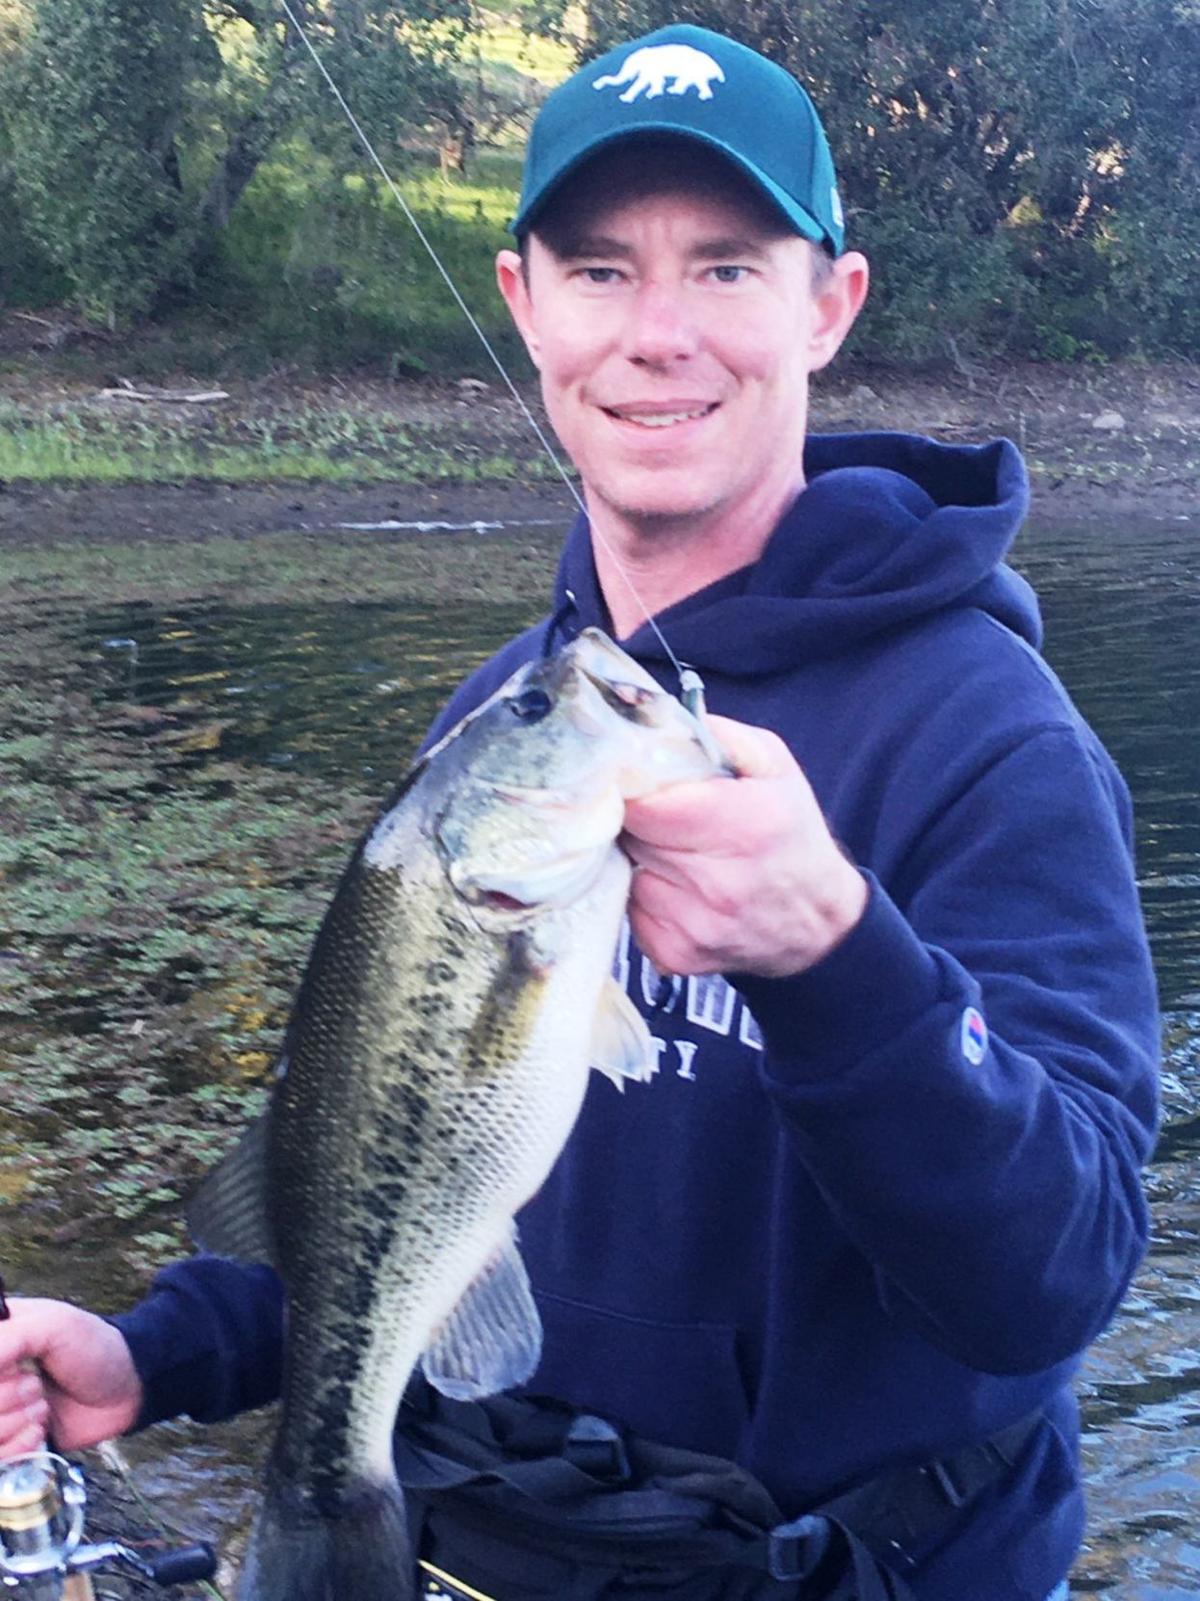 Napa Valley Fishing Report Blasingame Shows Shhs Anglers How It S Done Outdoors Napavalleyregister Com